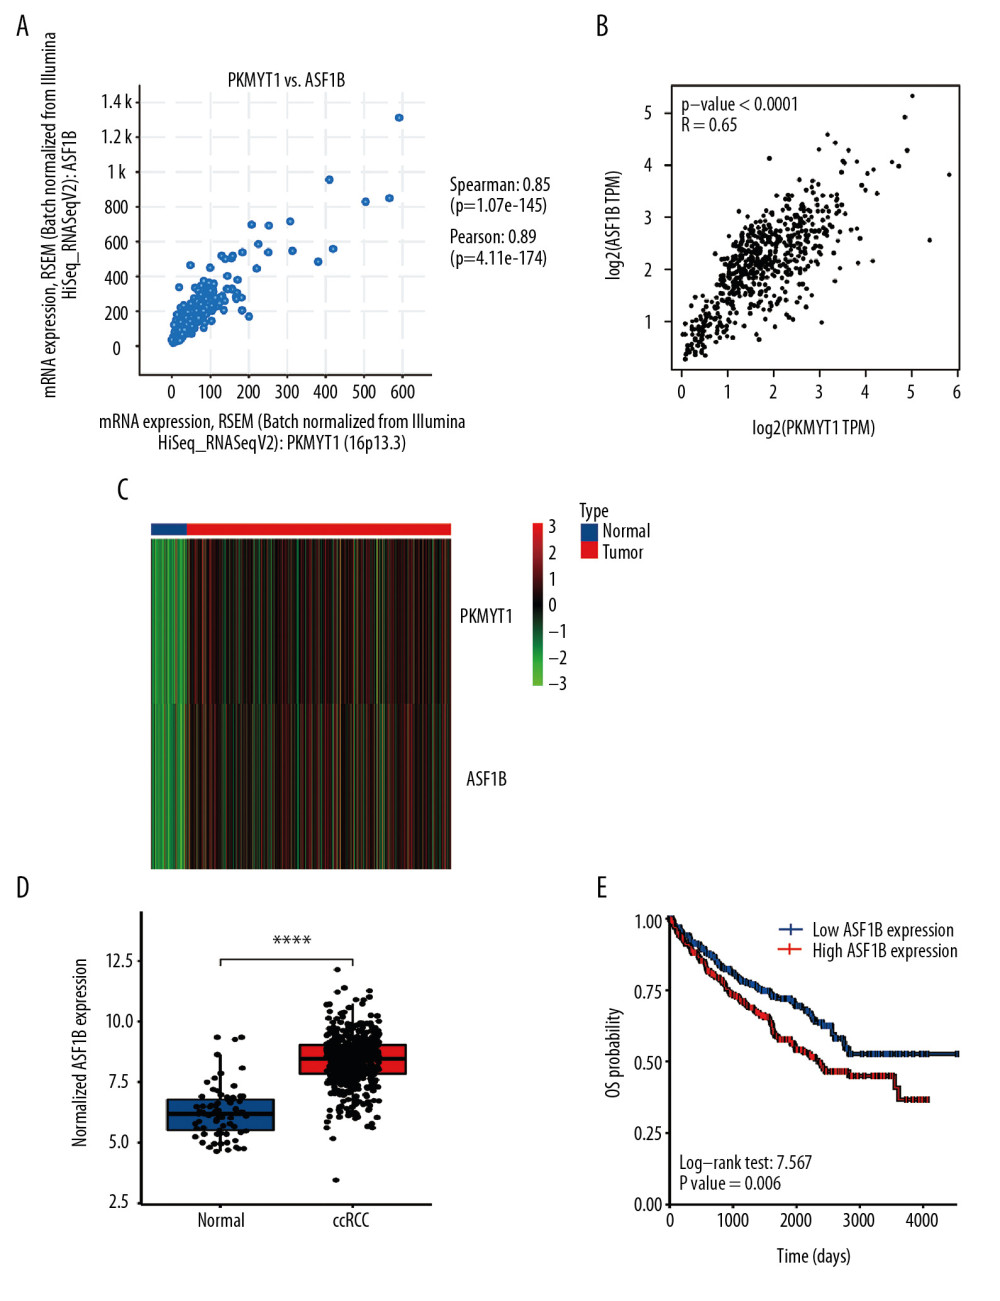 PKMYT1 is significantly correlated with ASF1B gene expression in ccRCC. There was a positive correlation between PKMYT1 and ASF1B based on (A) cBioPortal regression analysis, (B) GEPIA, and (C) TCGA dataset. (D) ASF1B was significantly increased in ccRCC compared with normal tissue. (E) High expression of ASF1B was associated with poor prognosis for ccRCC. ccRCC – clear cell renal cell carcinoma; GEPIA – Gene Expression Profiling Interactive Analysis; TCGA – The Cancer Genome Atlas.